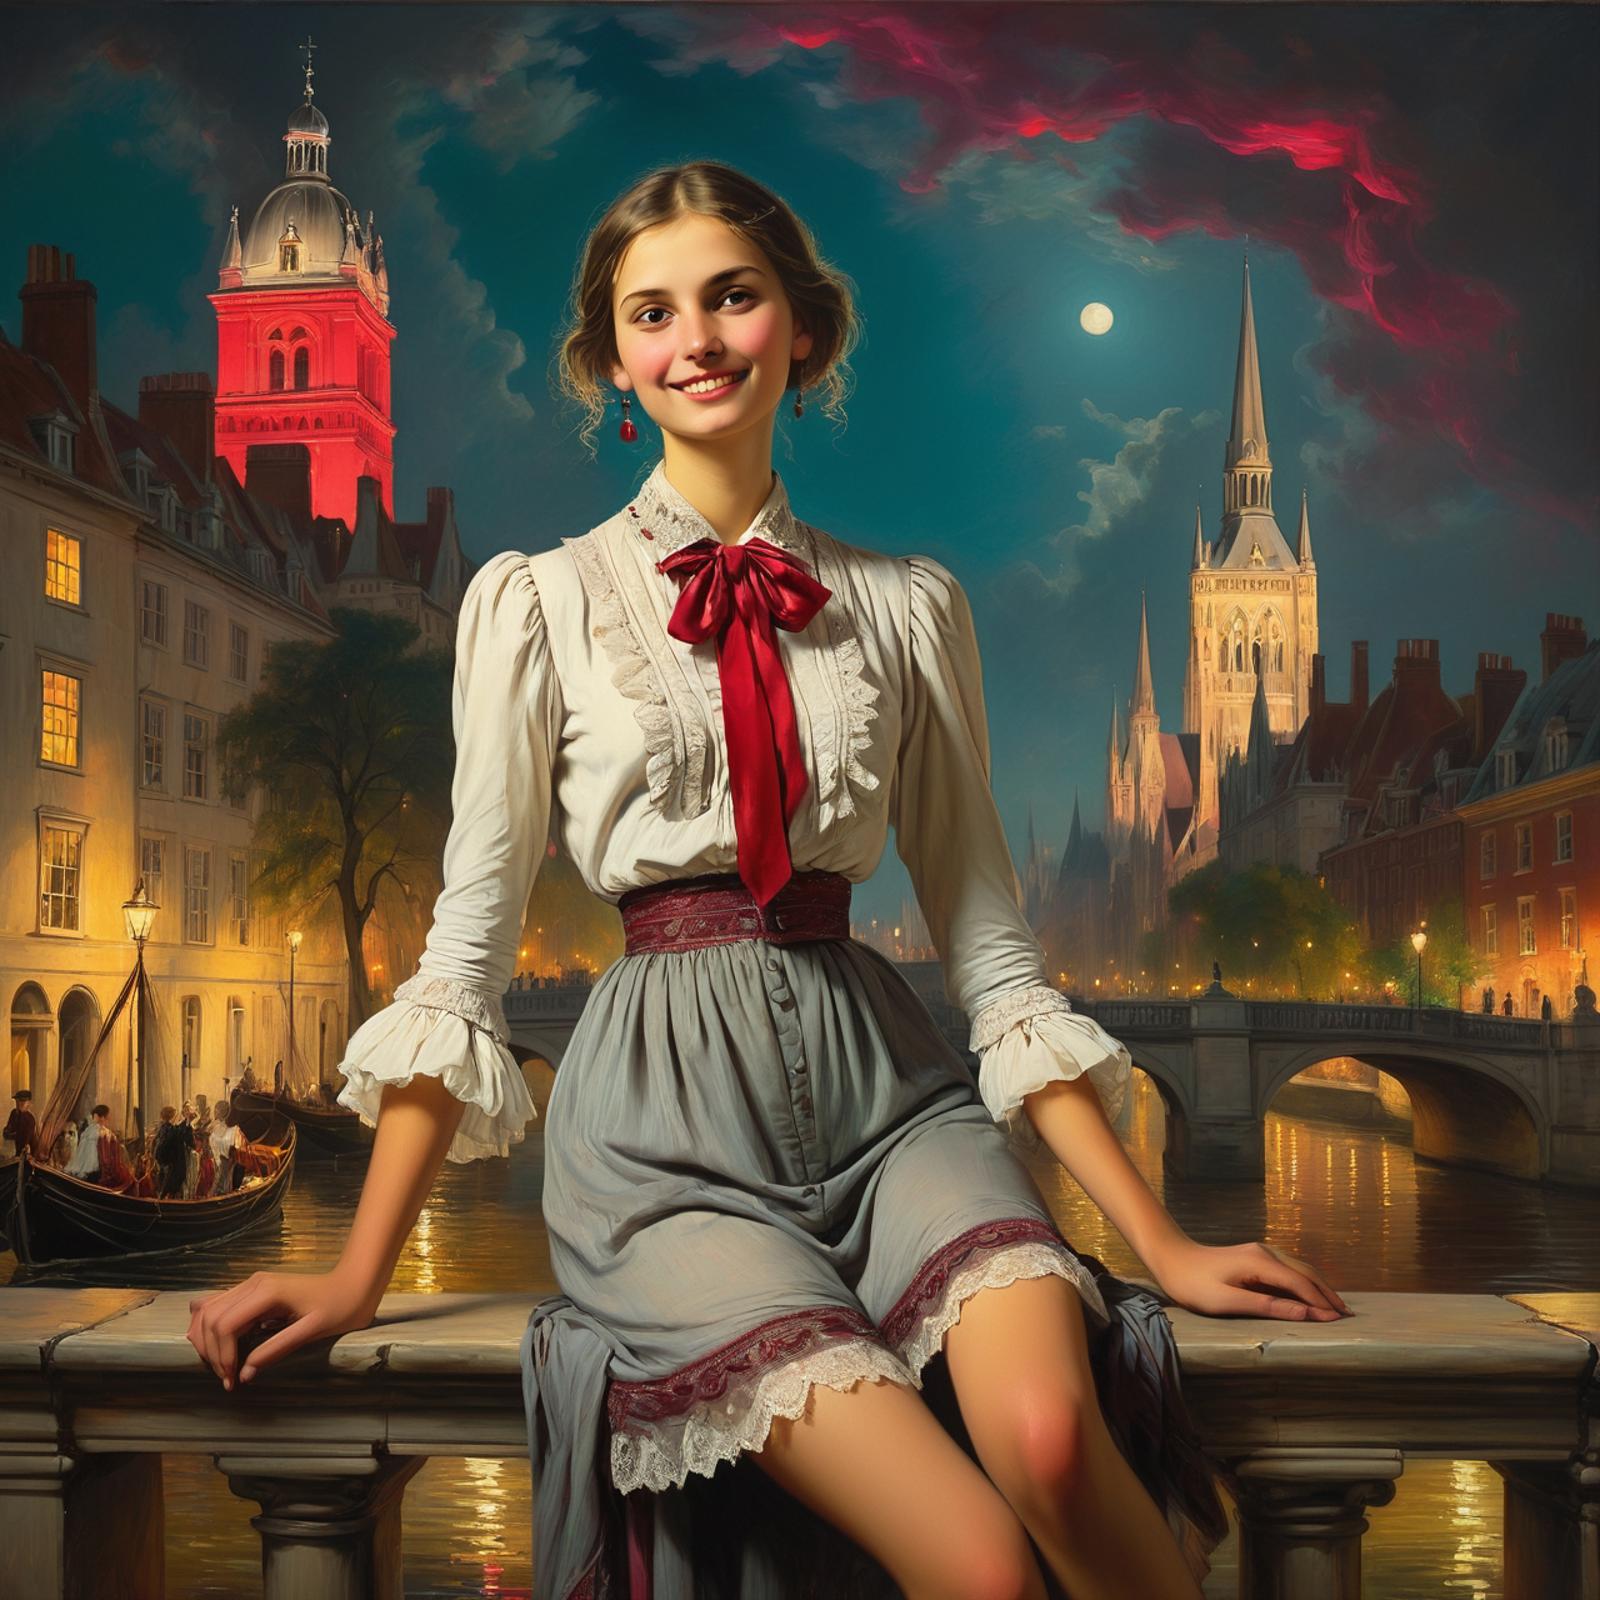 A woman in a white dress and red bow sitting on a bridge at night.